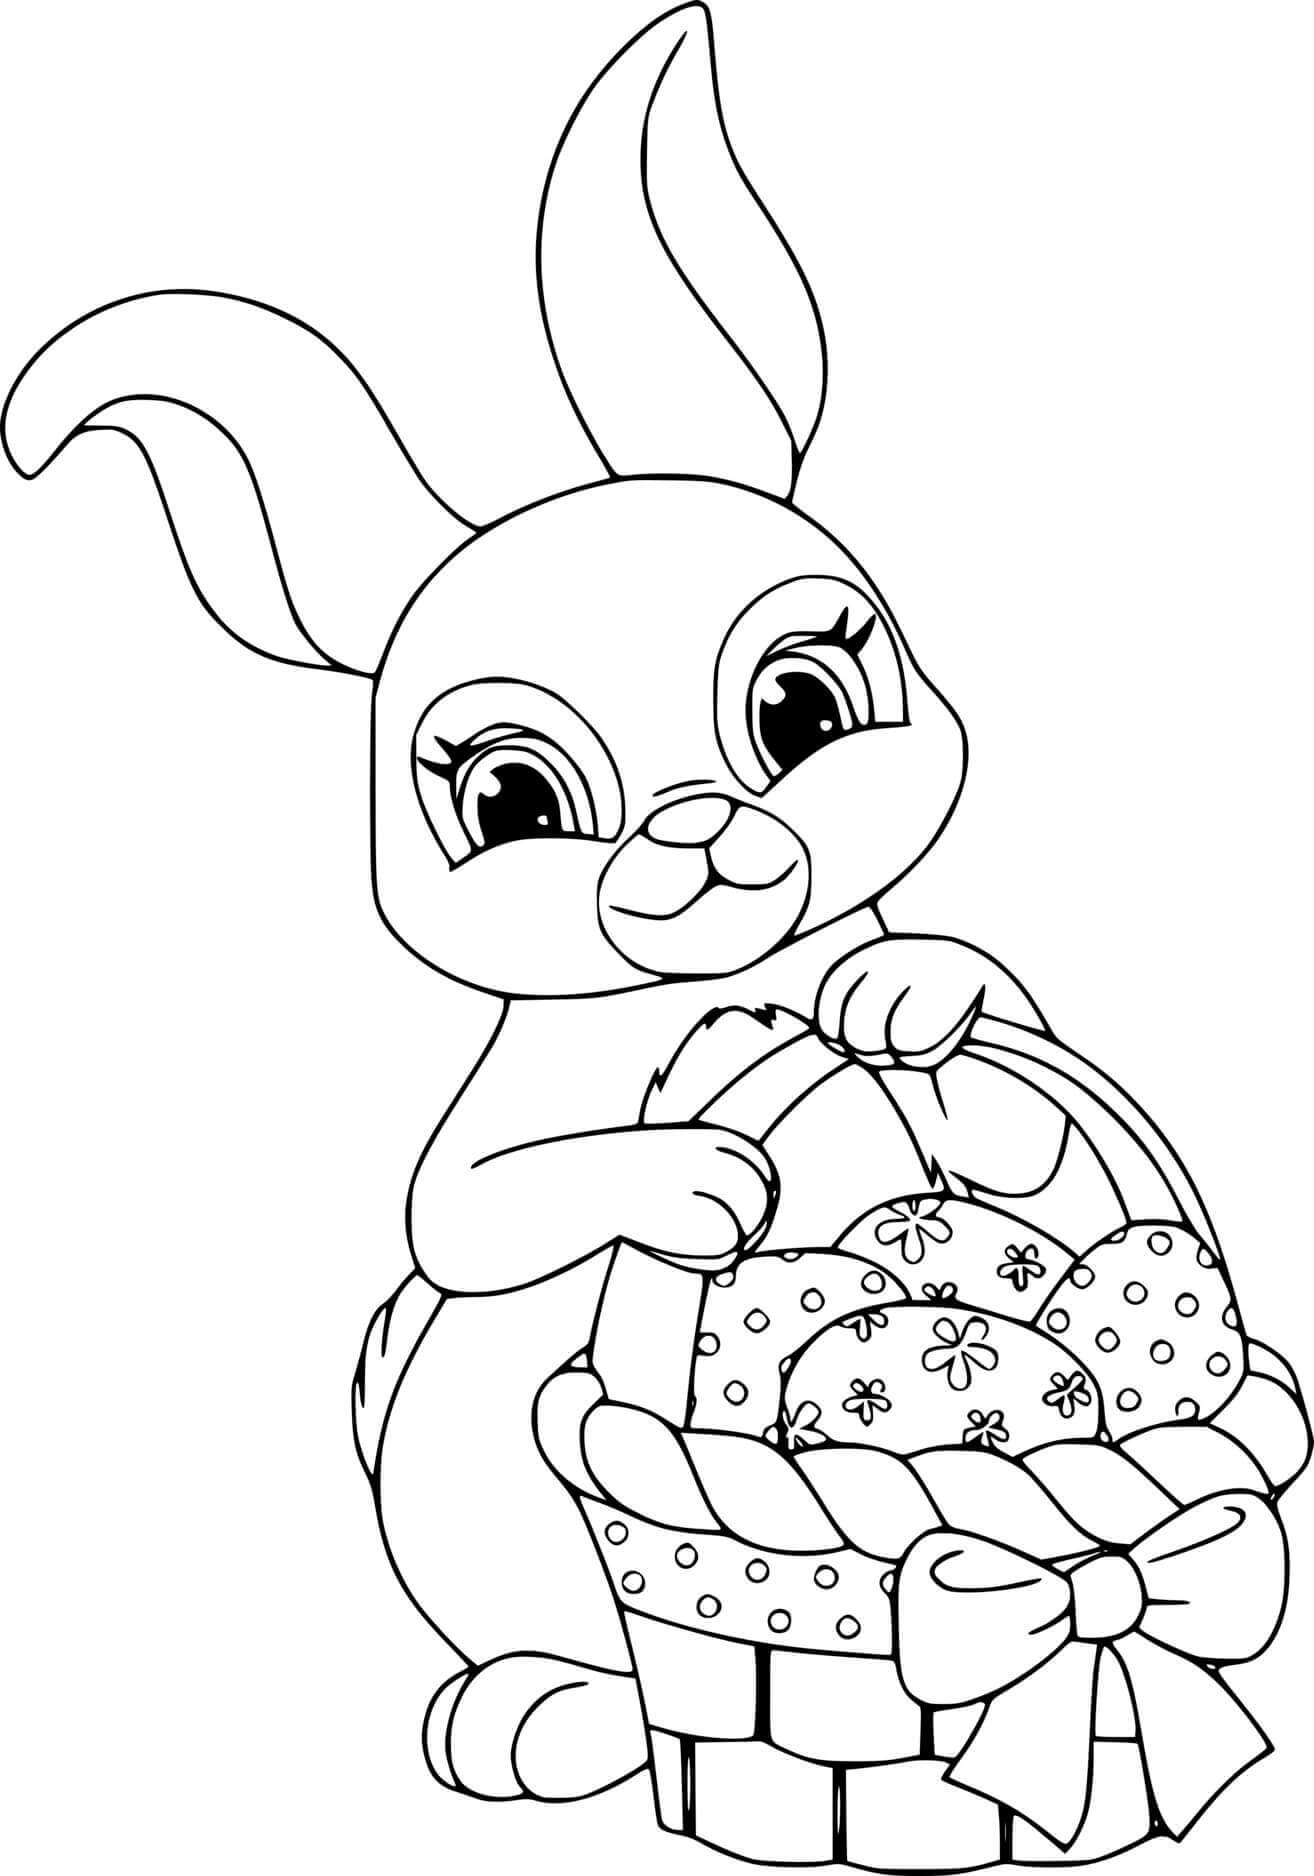 Easter Bunny Holds A Basket With Four Eggs Coloring Page